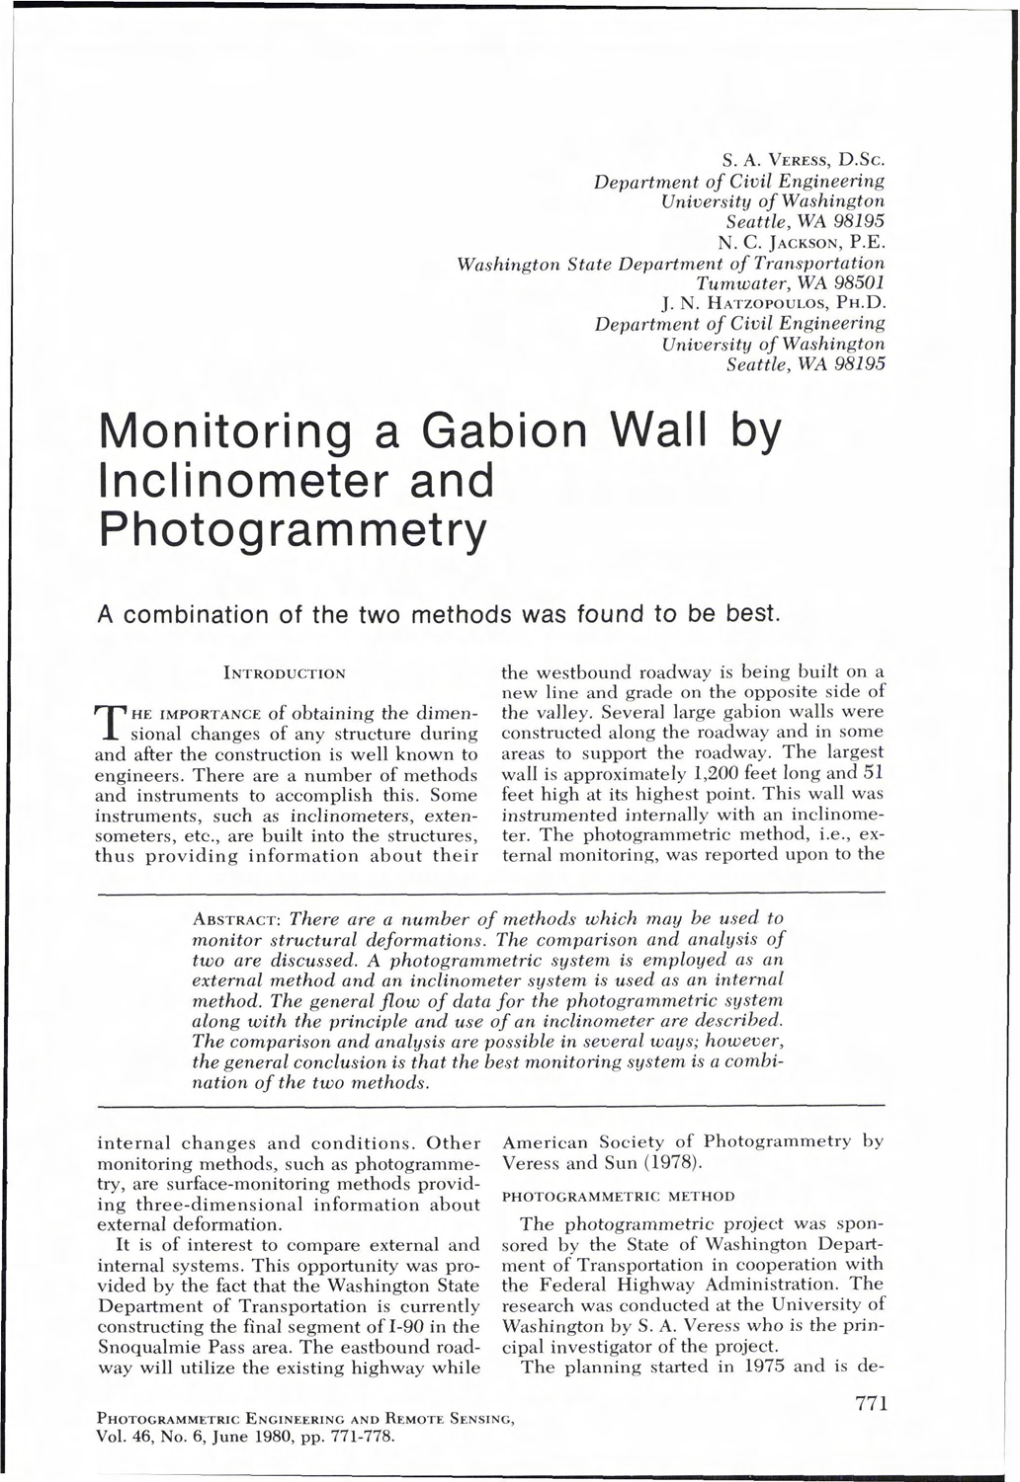 Monitoring a Gabion Wall by Inclinometer and Photogrammetry